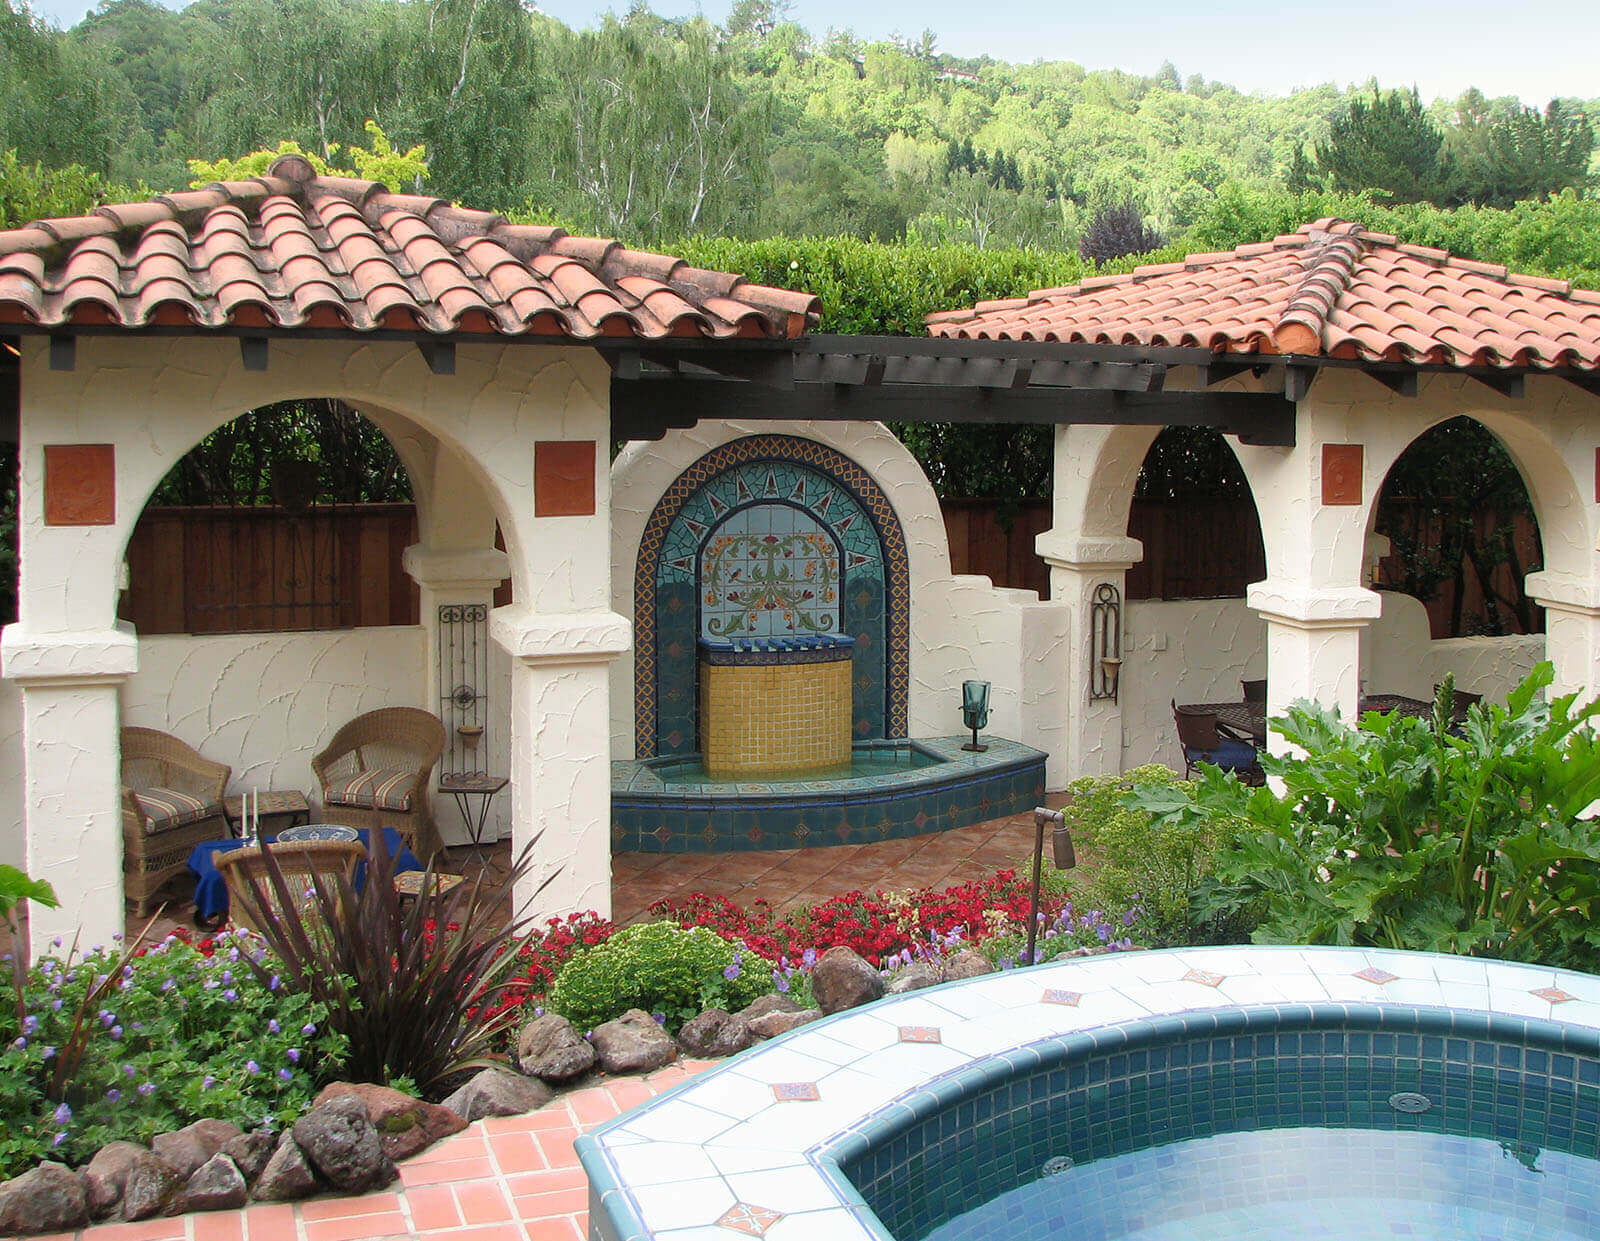 Shaded small squared mission style roof verandas connected with a dark wood pergola with arched mosaic fountain underneath